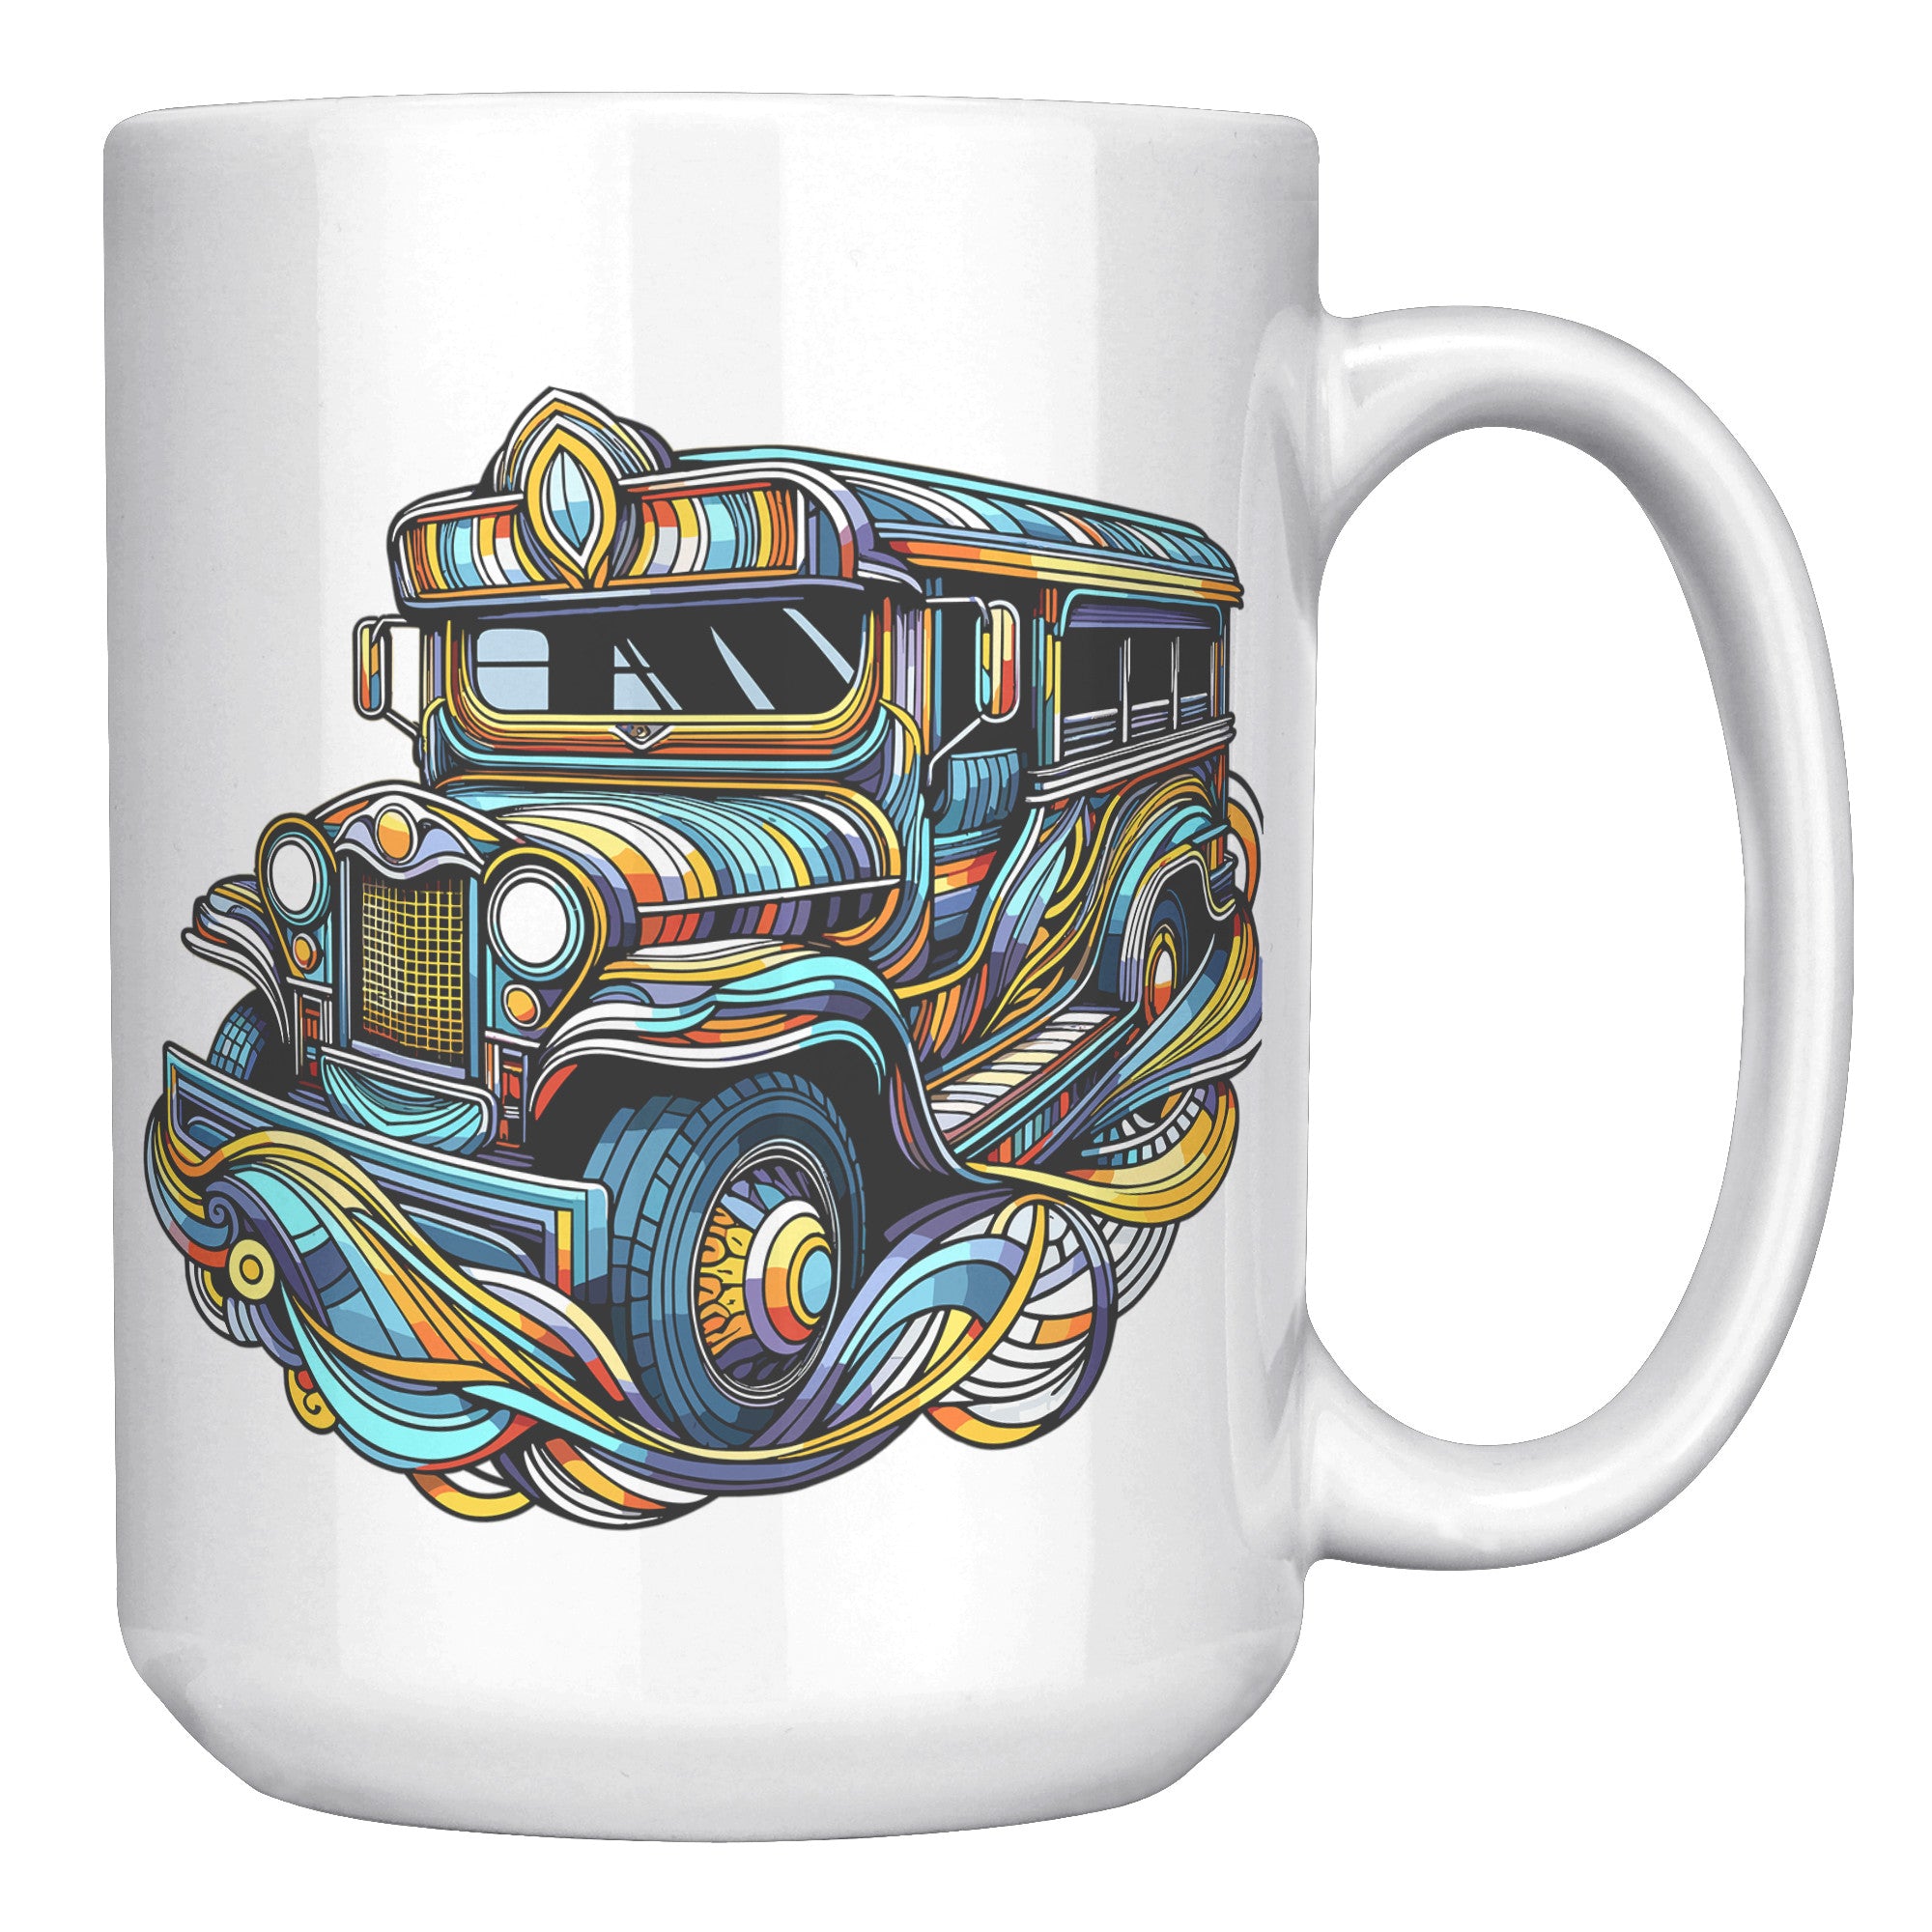 Iconic Jeepney Coffee Mug - Celebrate Filipino Culture - Unique Philippines-Inspired Cup - Perfect Gift for Pinoy Pride! - C1